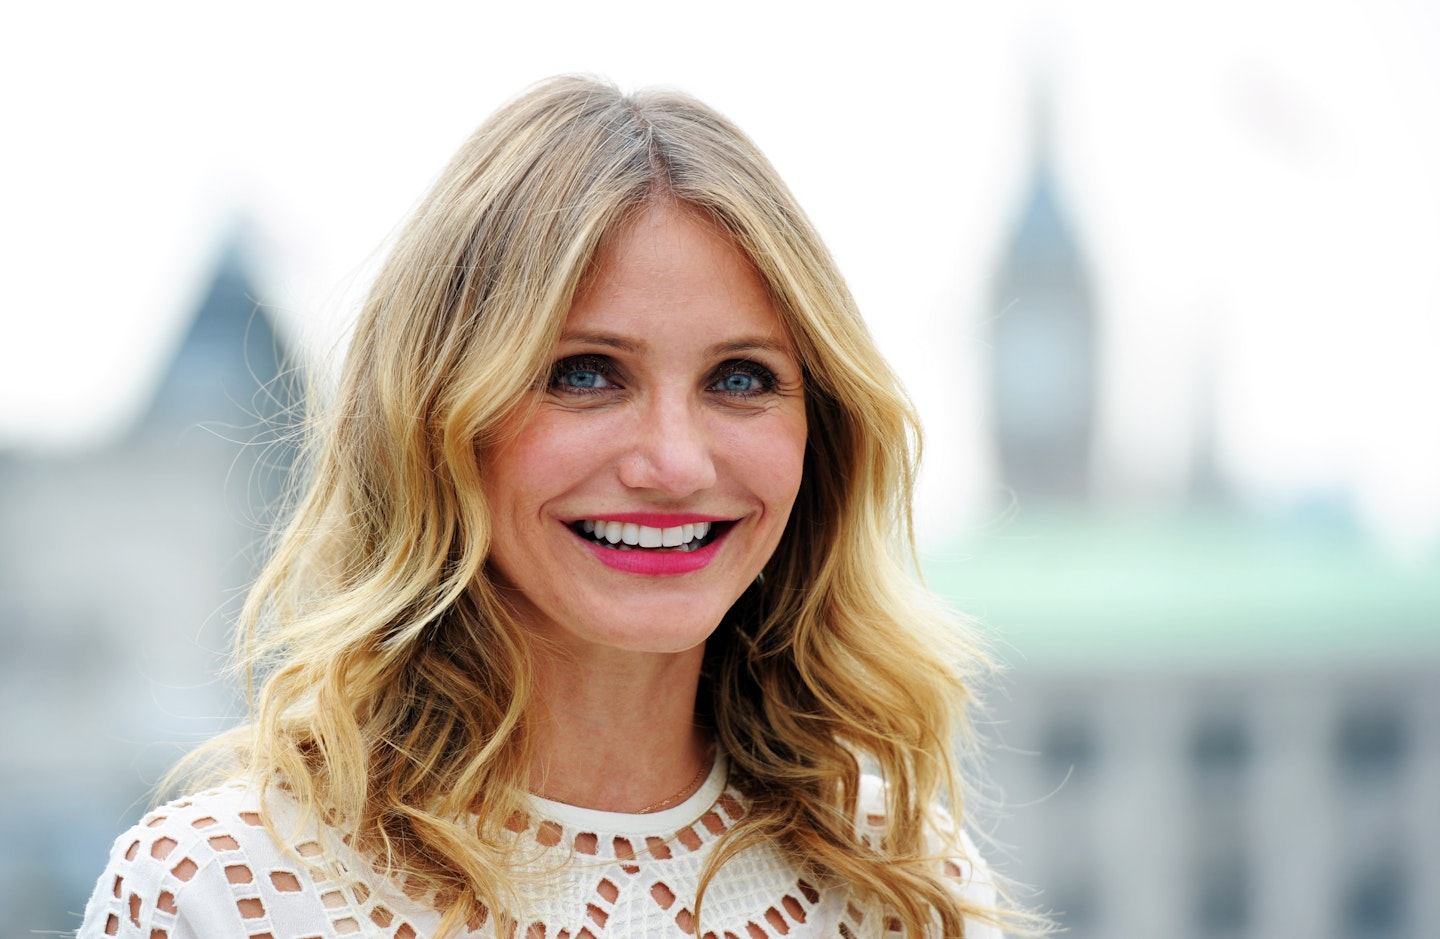 Great Outfits in Fashion History: Cameron Diaz, Drew Barrymore and